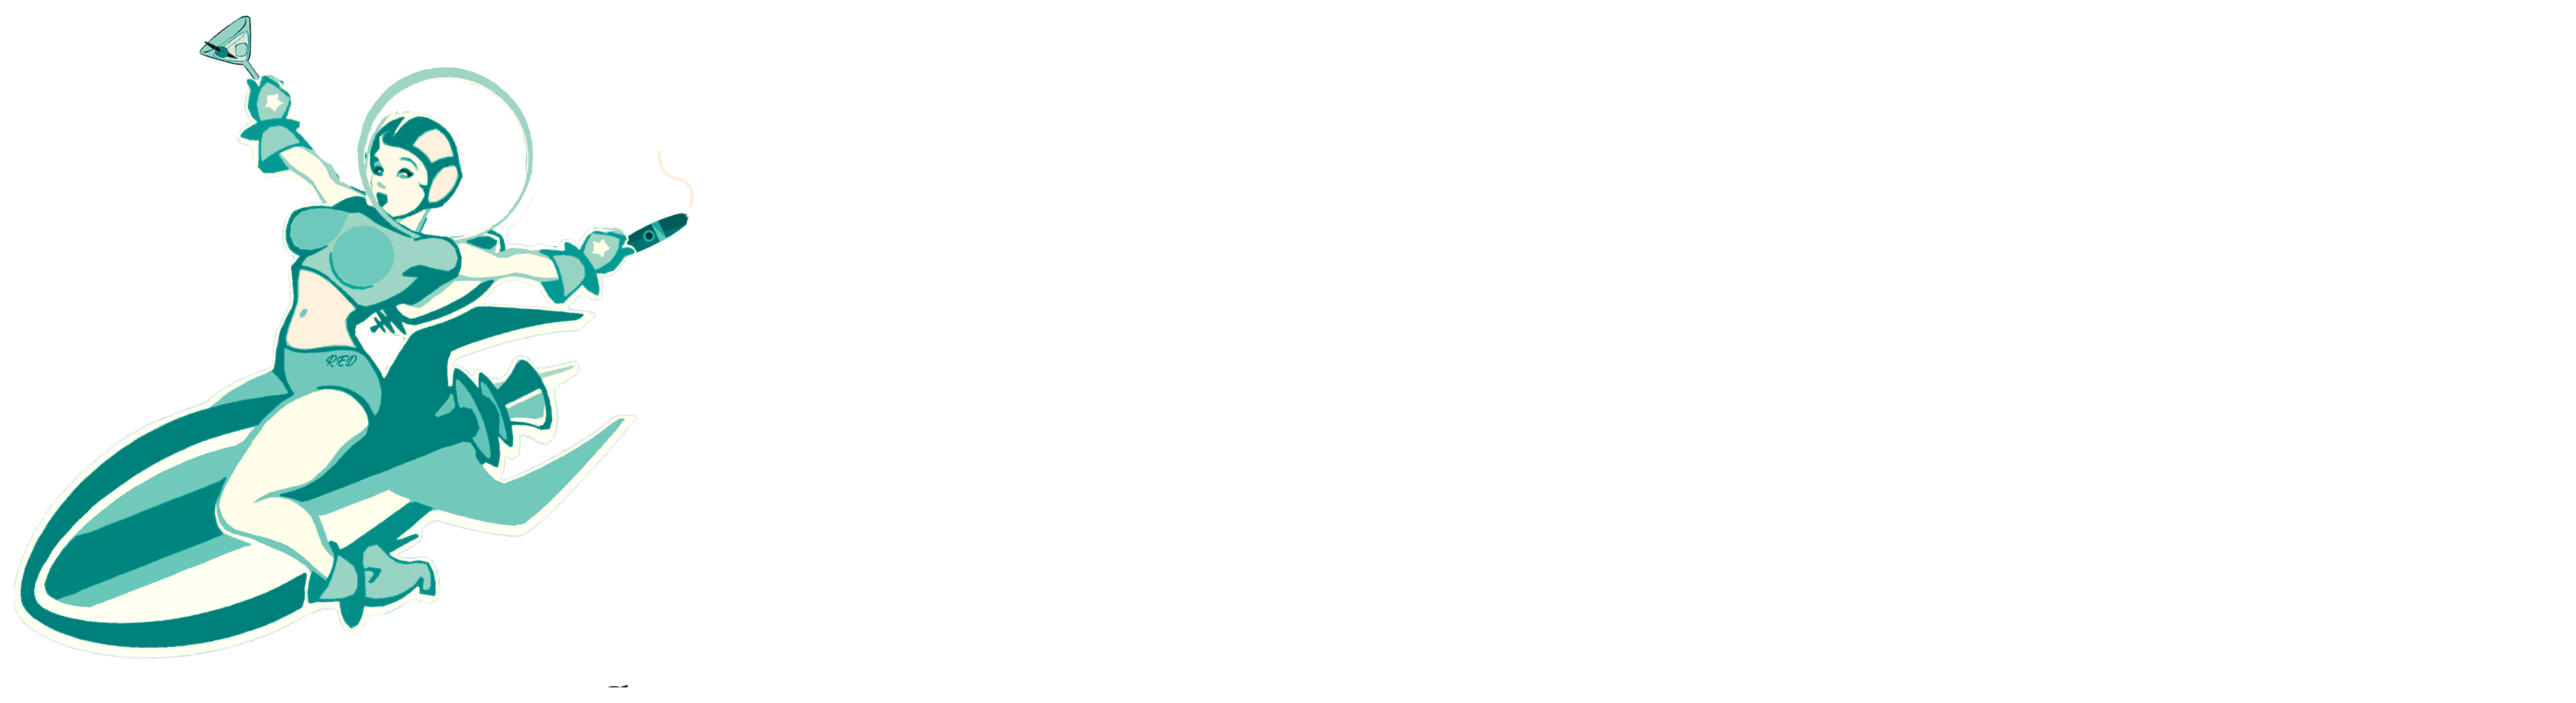 Smoking and Drinking in Space!